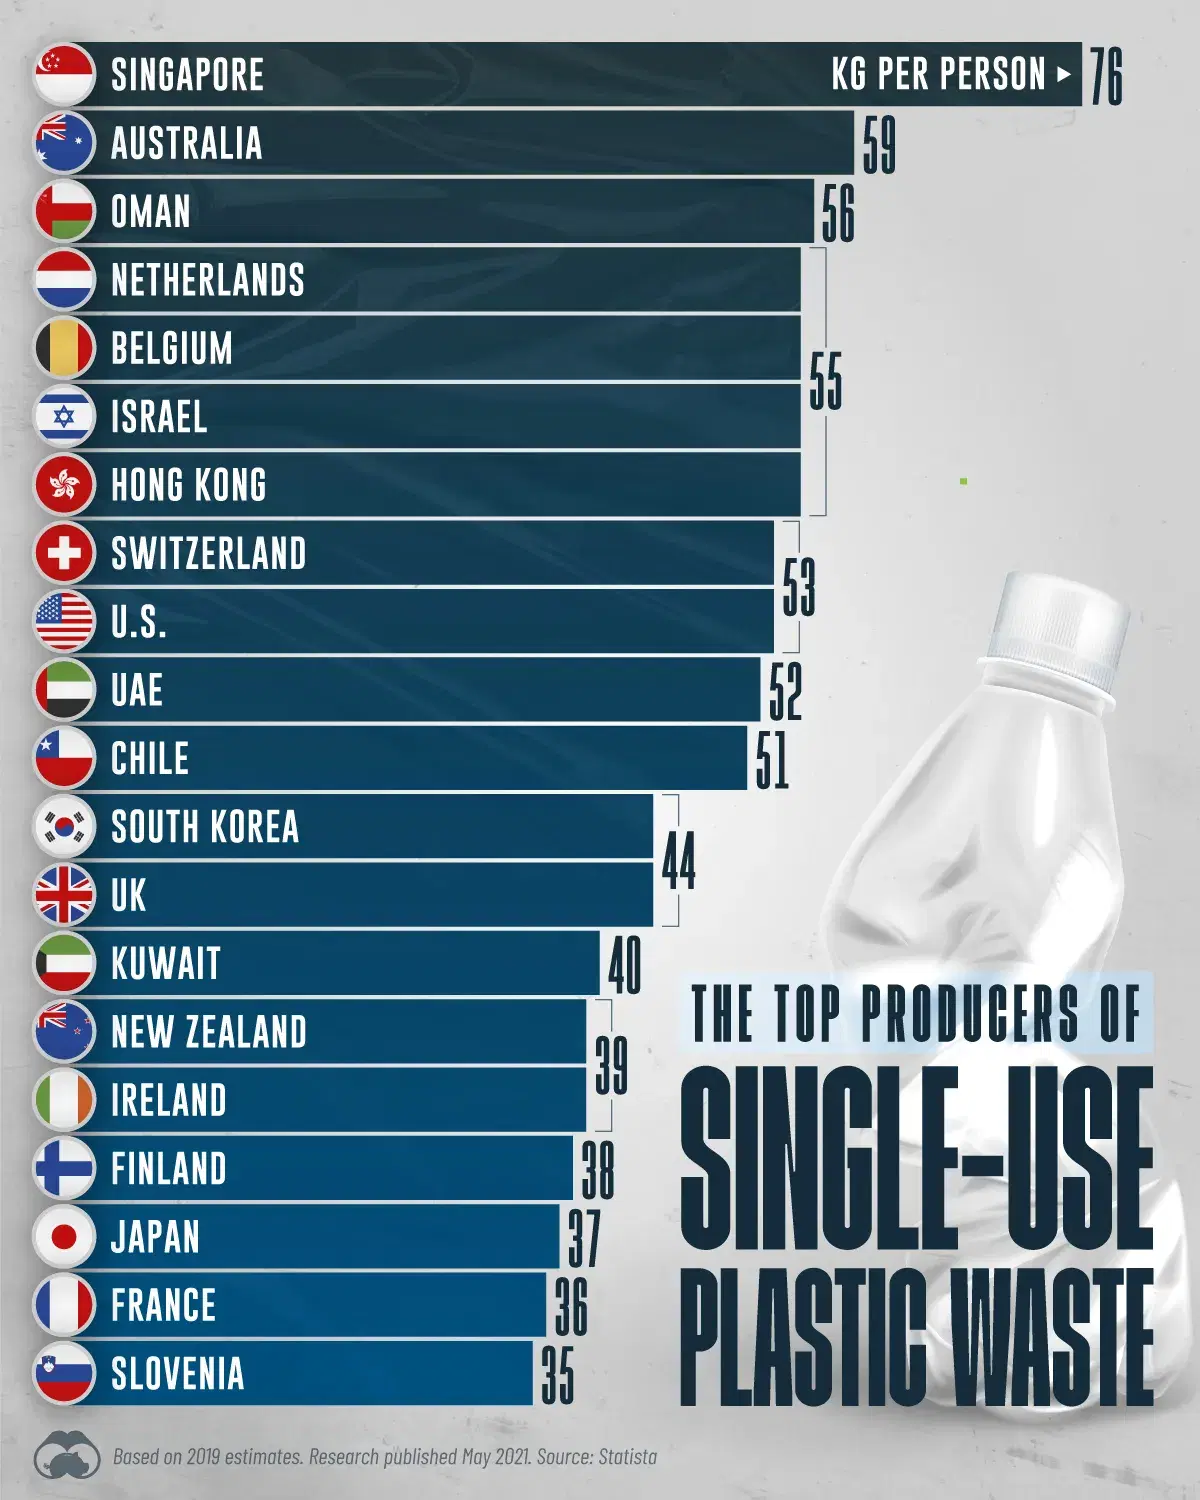 Singapore Leads in Terms of Plastic Waste per Capita